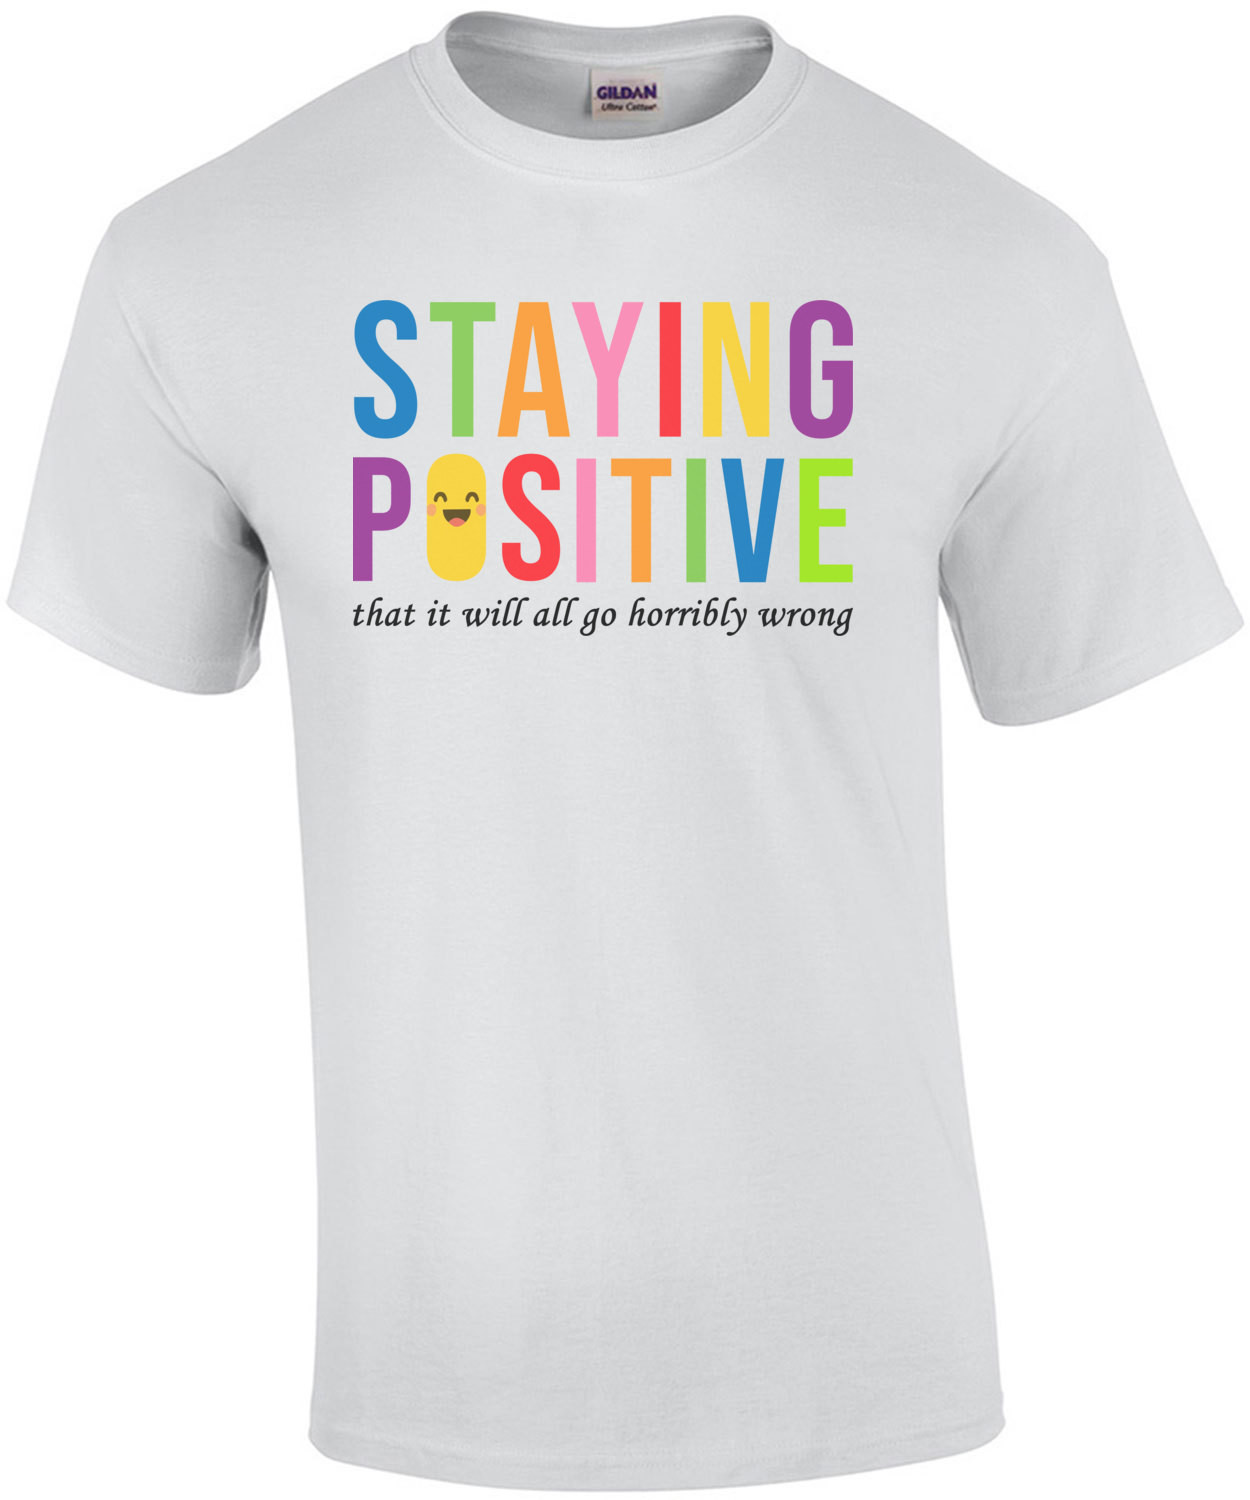 Staying Positive that it will all go horrible wrong - sarcastic t-shirt